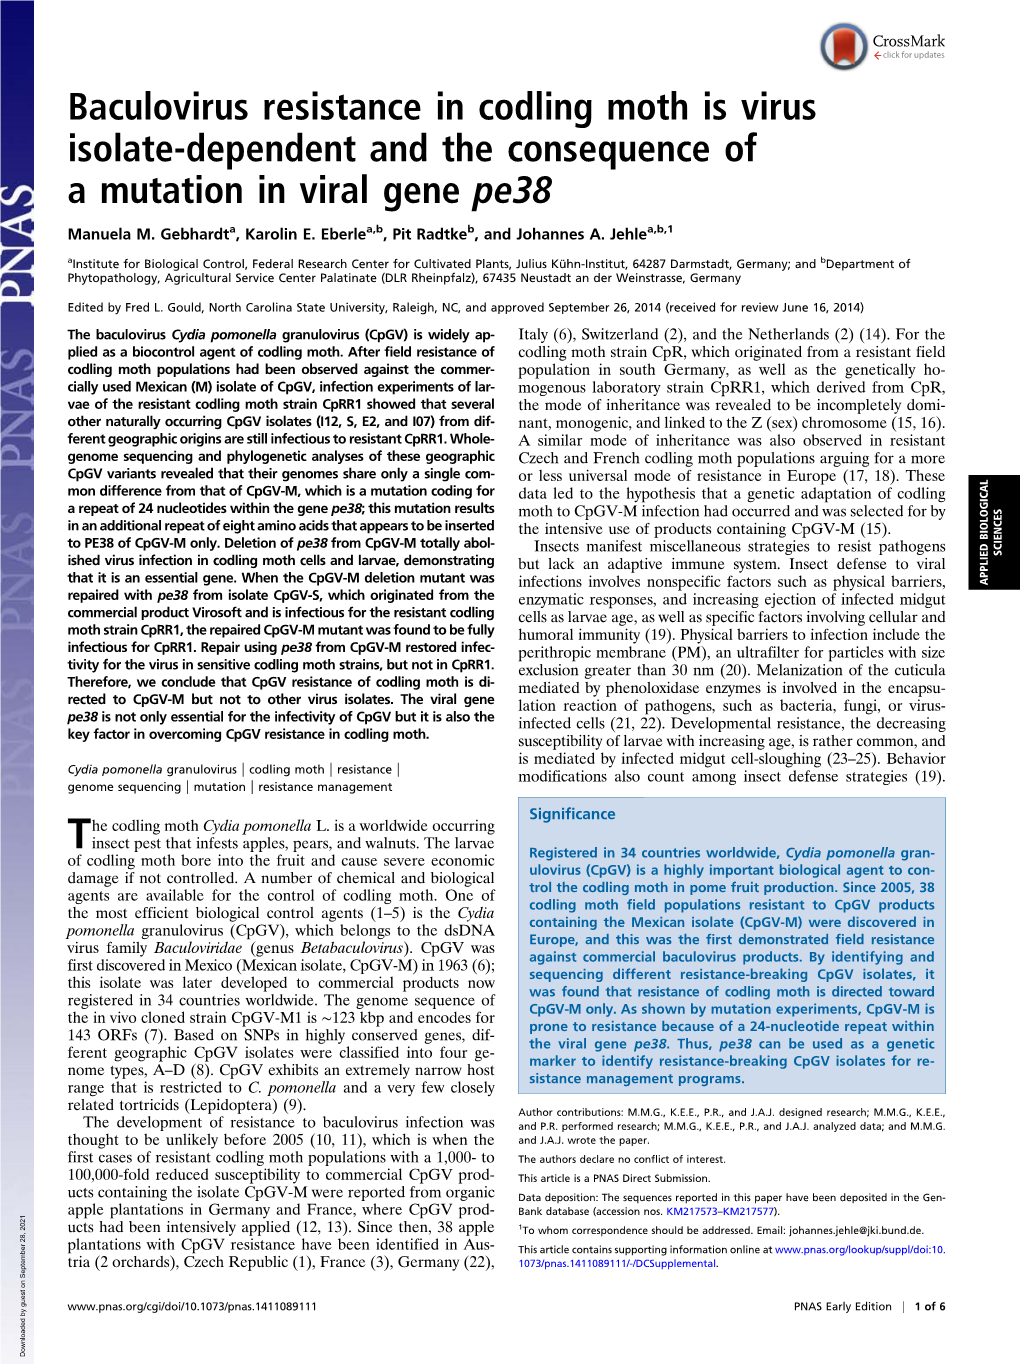 Baculovirus Resistance in Codling Moth Is Virus Isolate-Dependent and the Consequence of a Mutation in Viral Gene Pe38